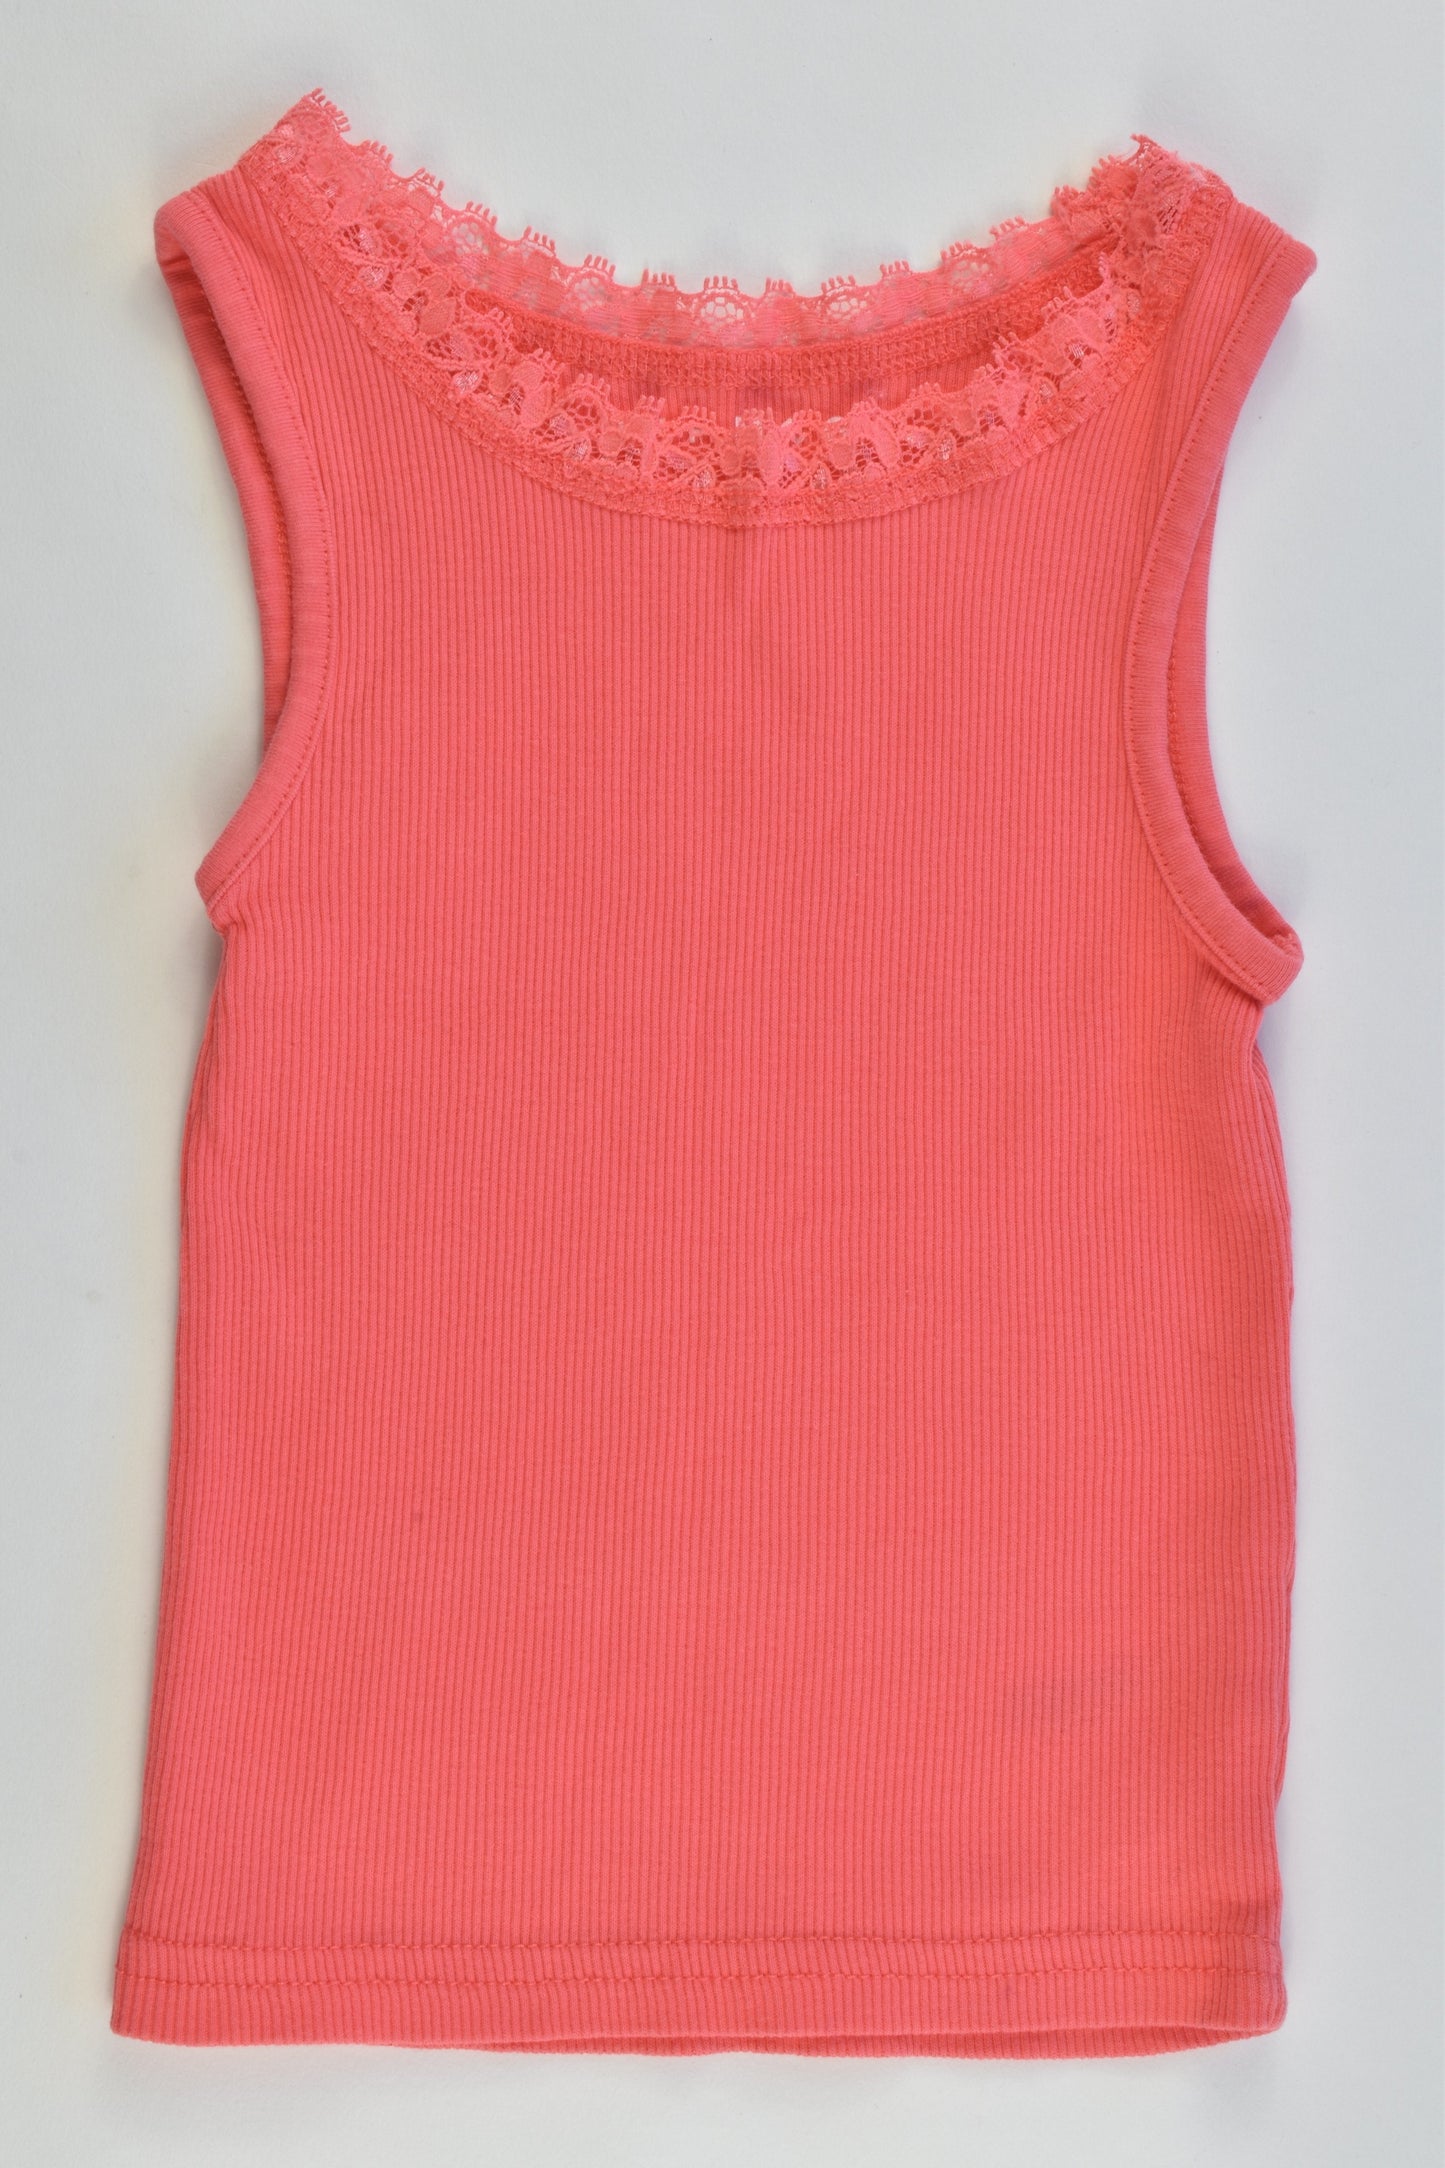 NEW Nutmeg Size 1.5-2 years Ribbed Singlet with Lace Detail